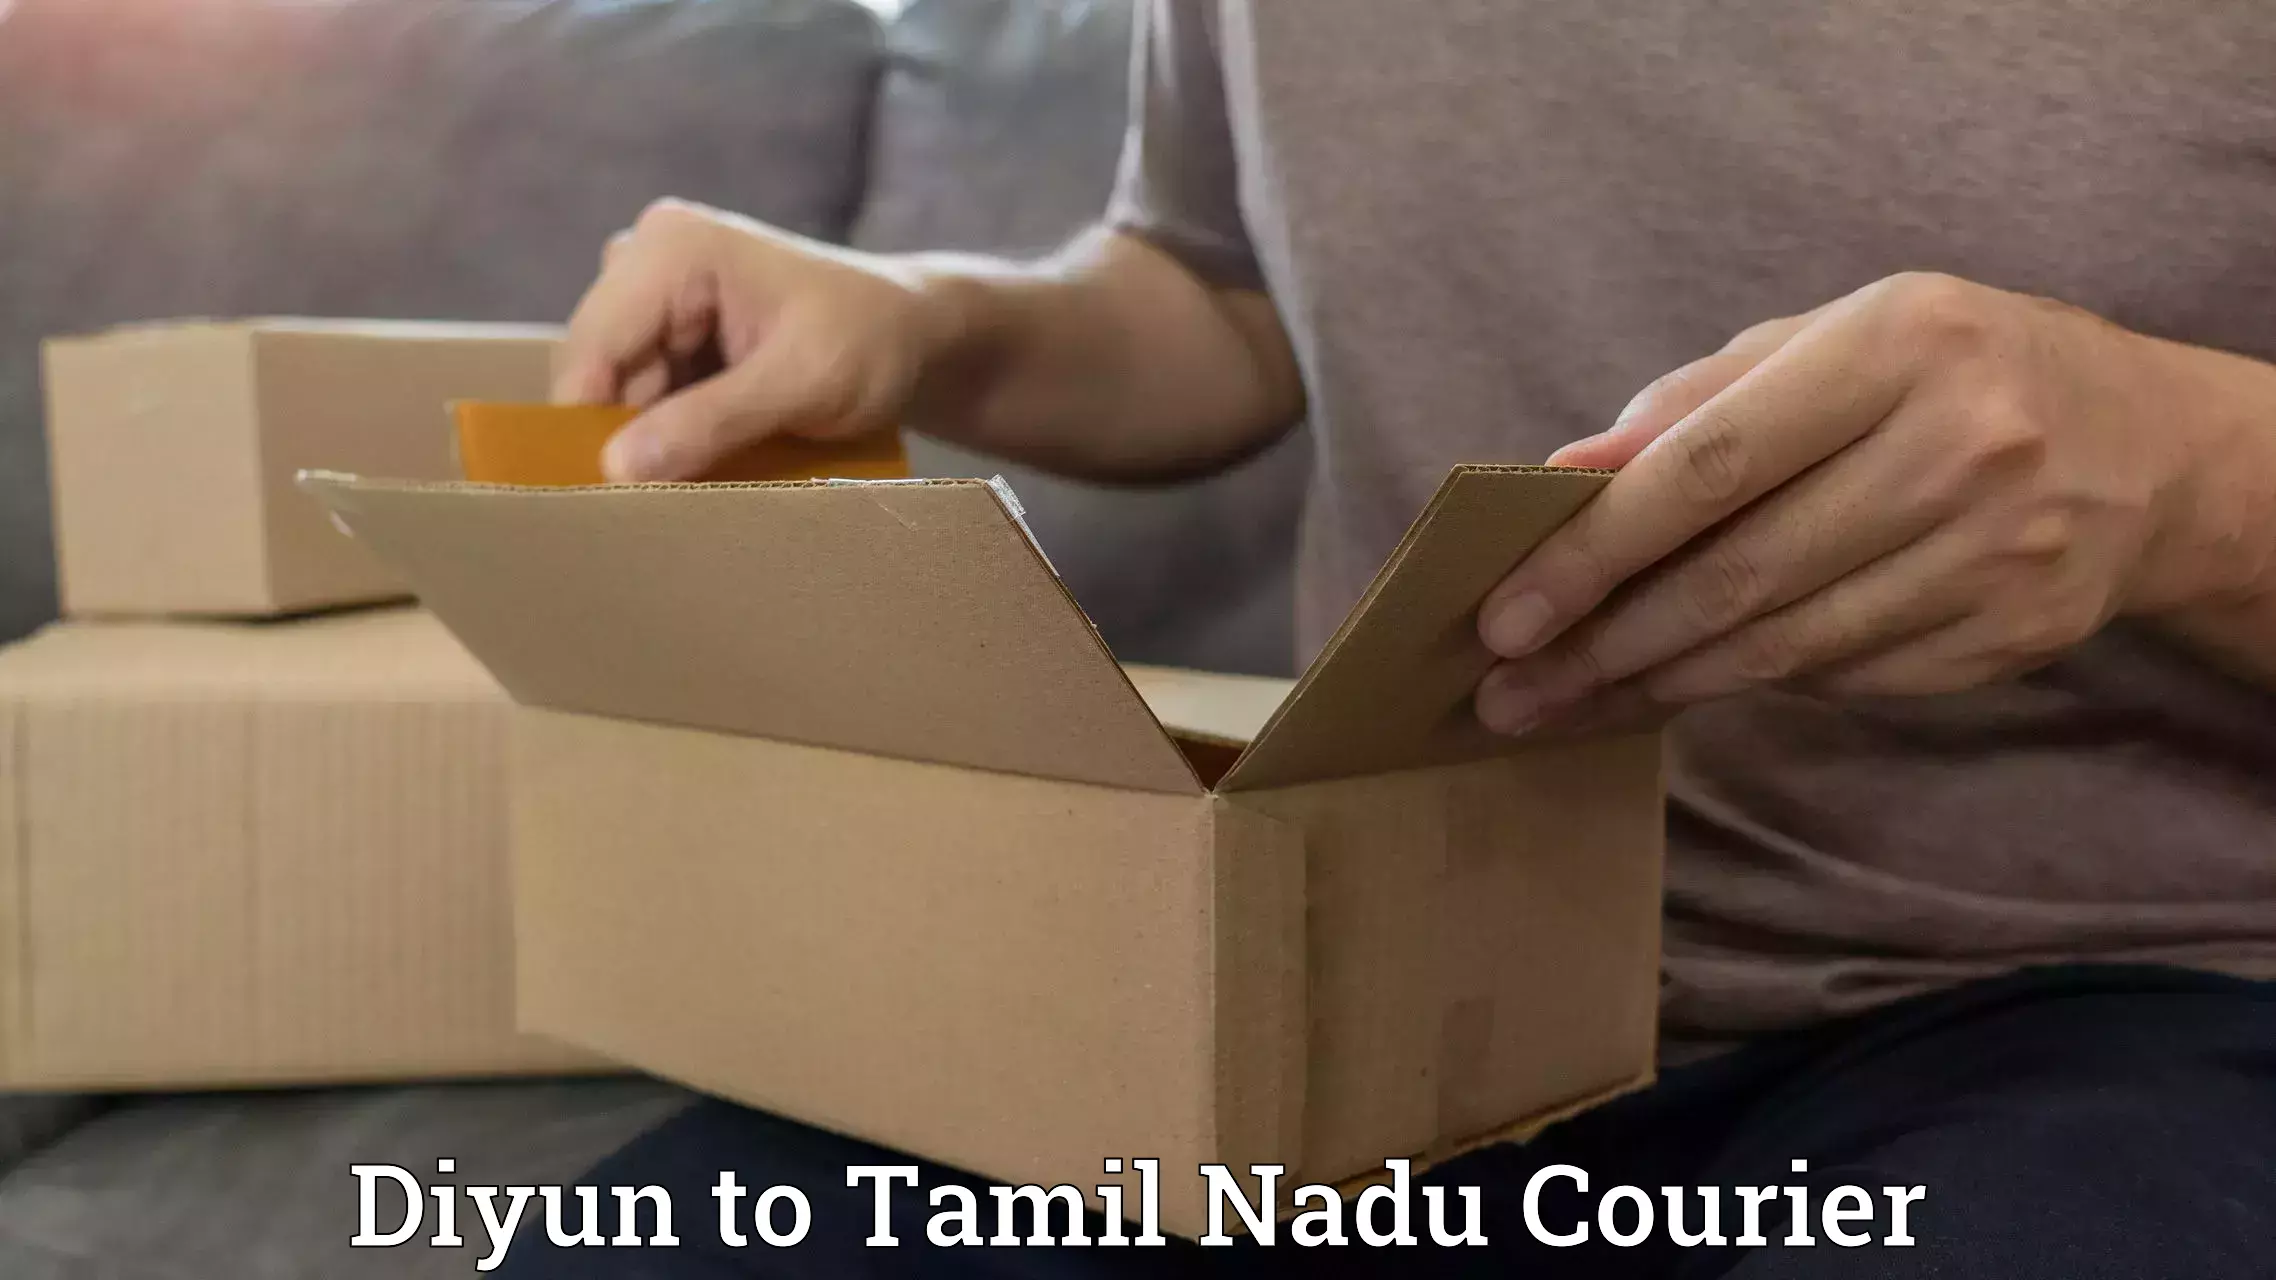 End-to-end delivery in Diyun to Tamil Nadu